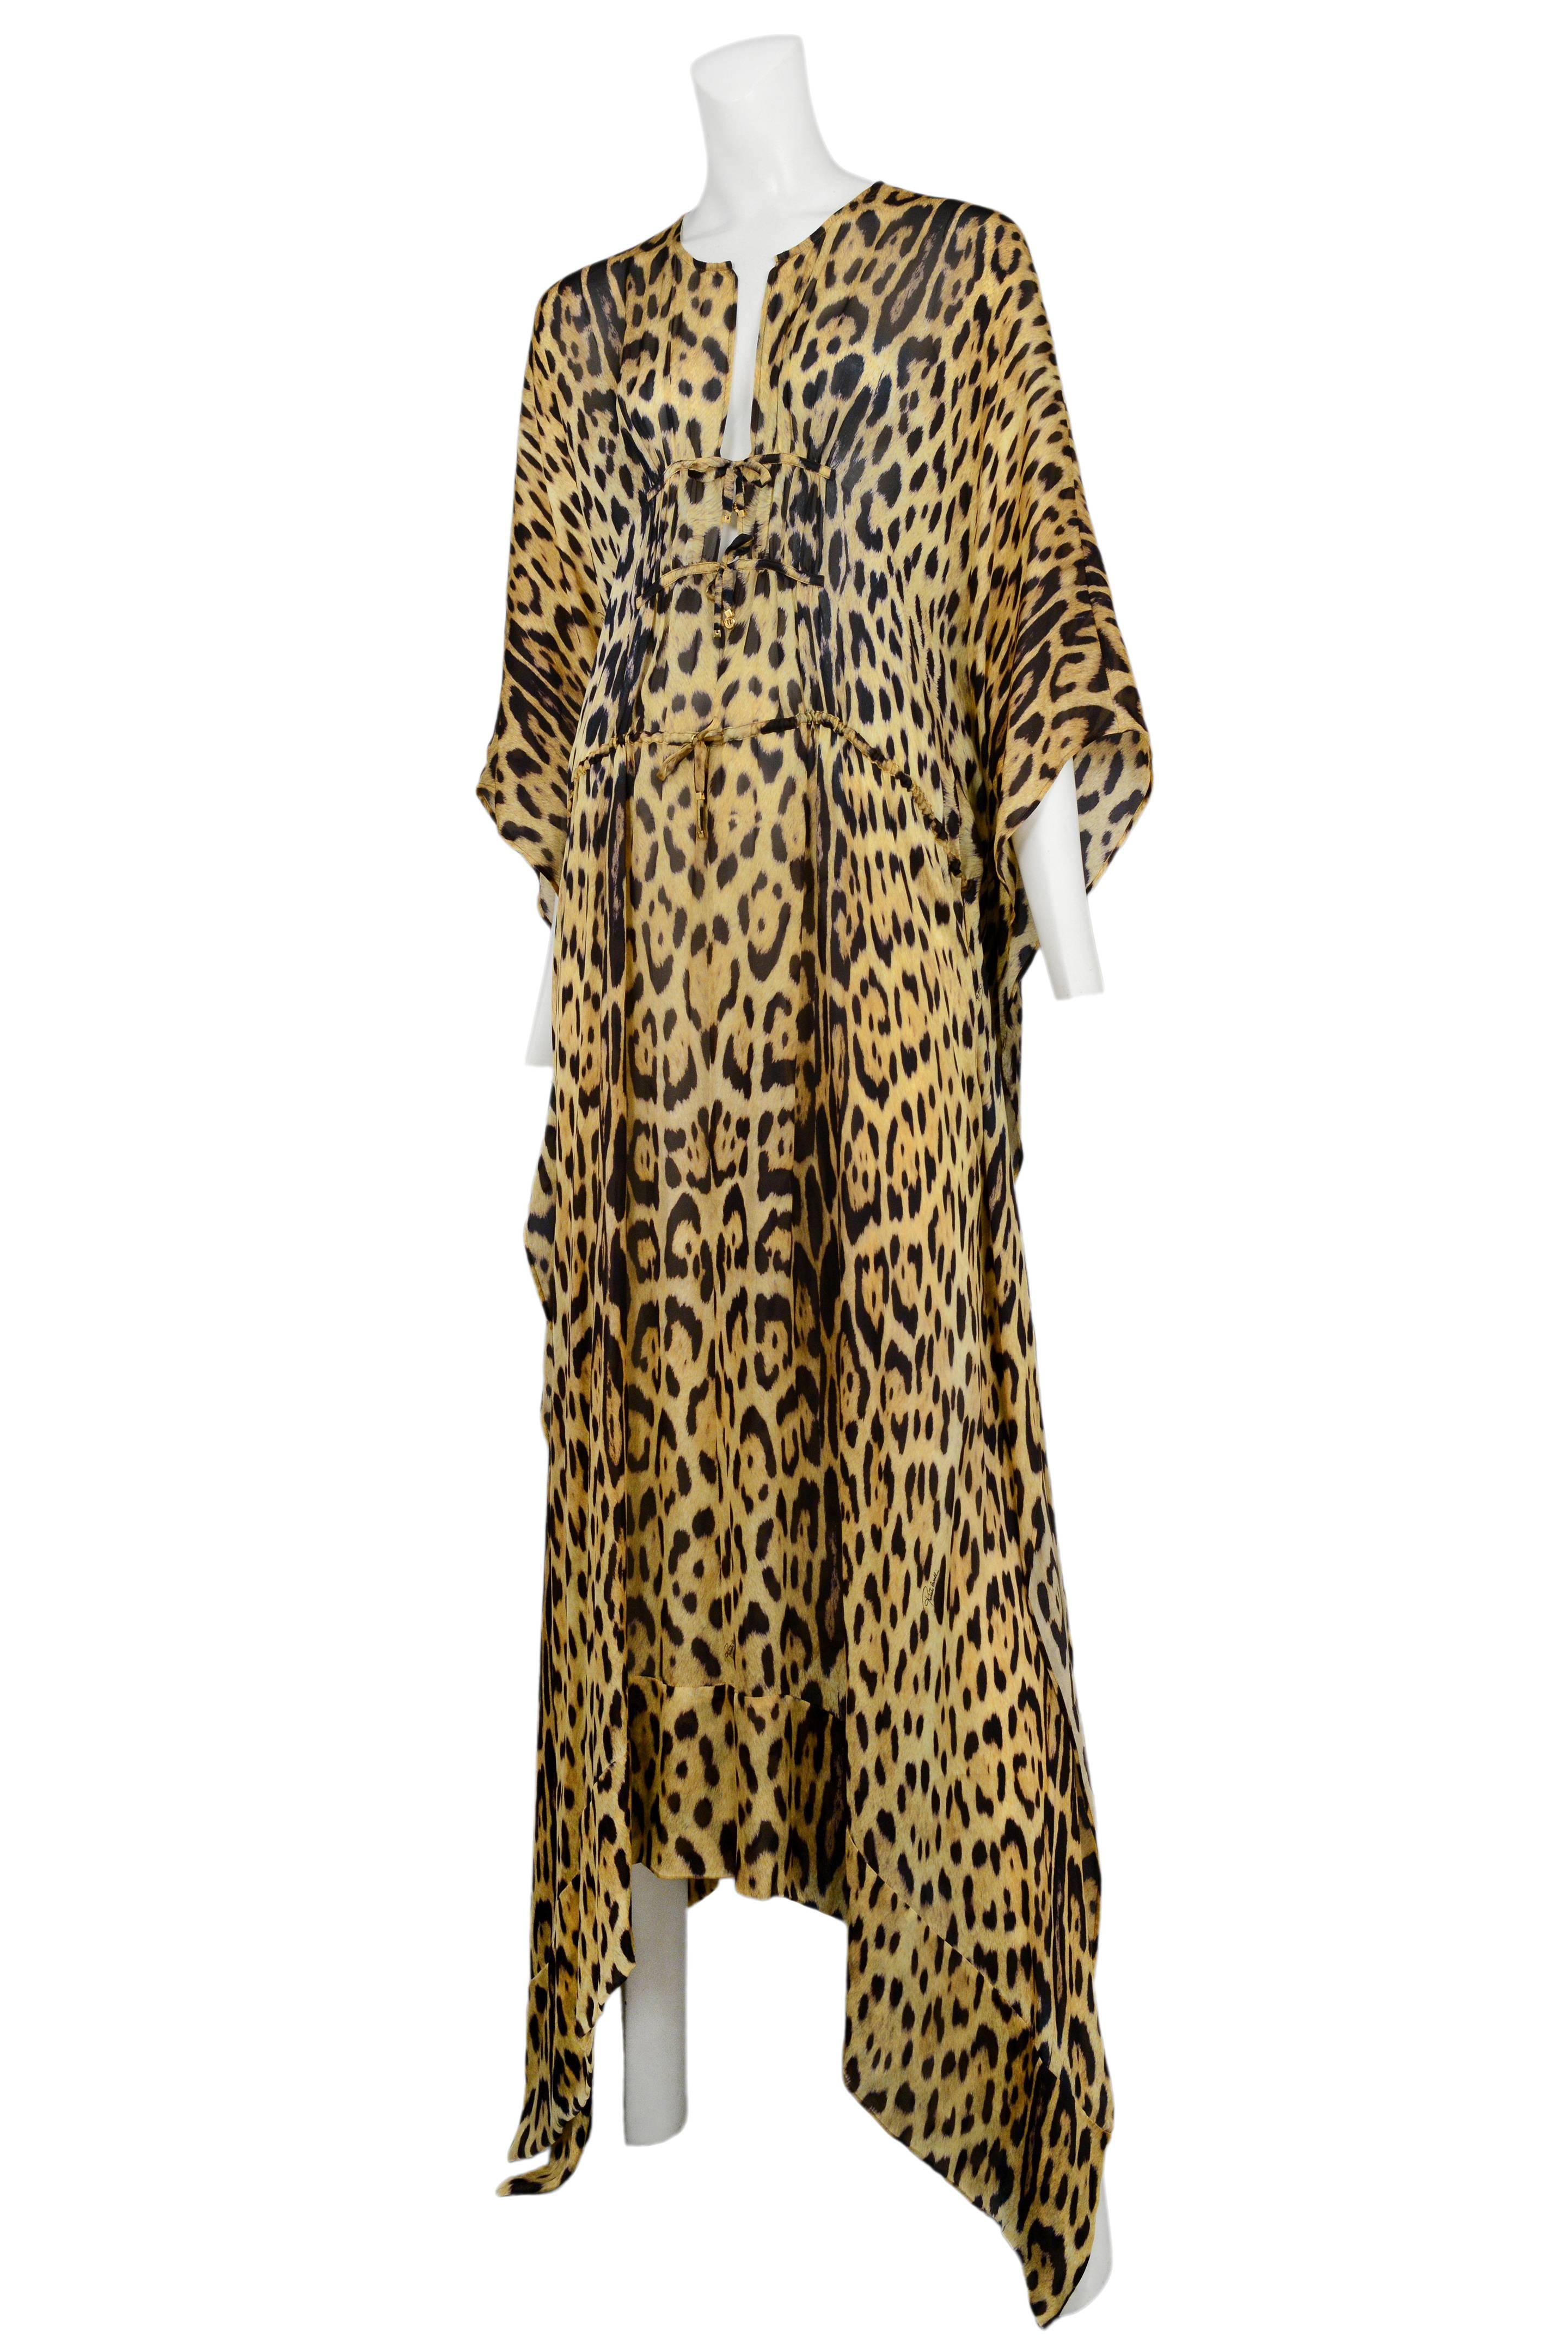 Vintage Roberto Cavalli silk leopard print caftan featuring ties at the center front and a drawstring at the lower waist.
Please inquire for additional images.